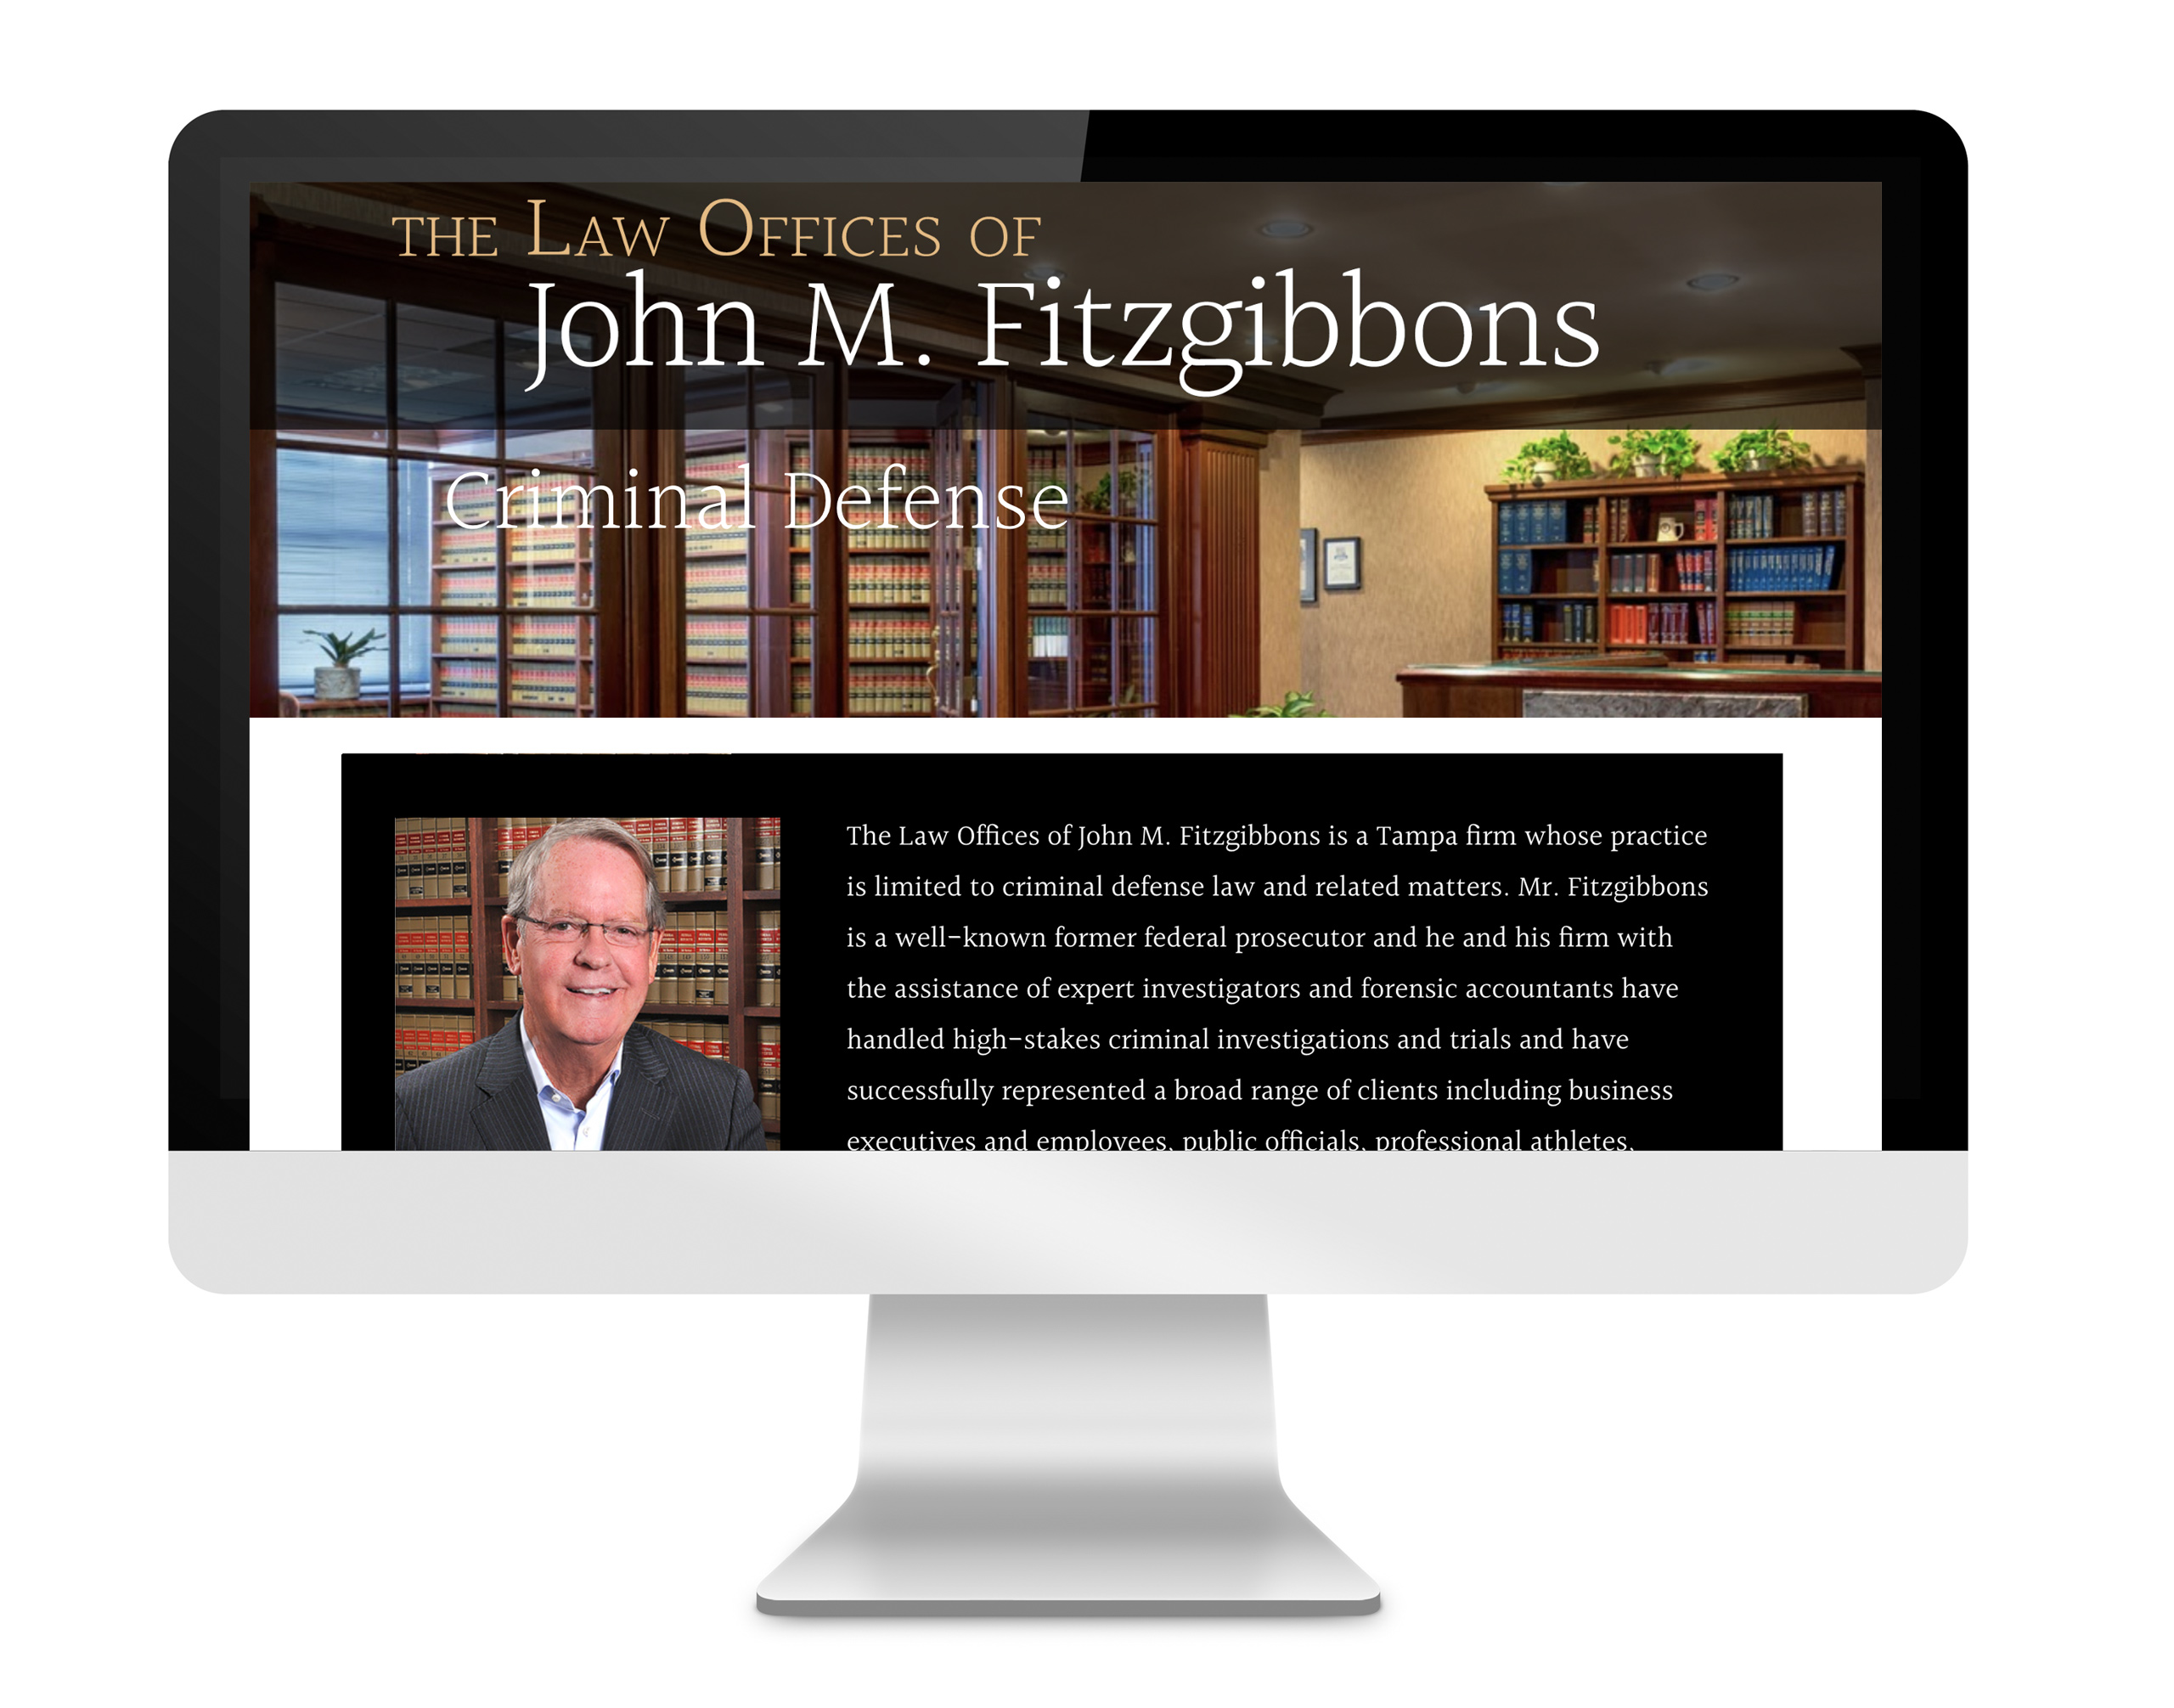 Law Offices of John M. Fitzgibbons website, designed by DLS Design